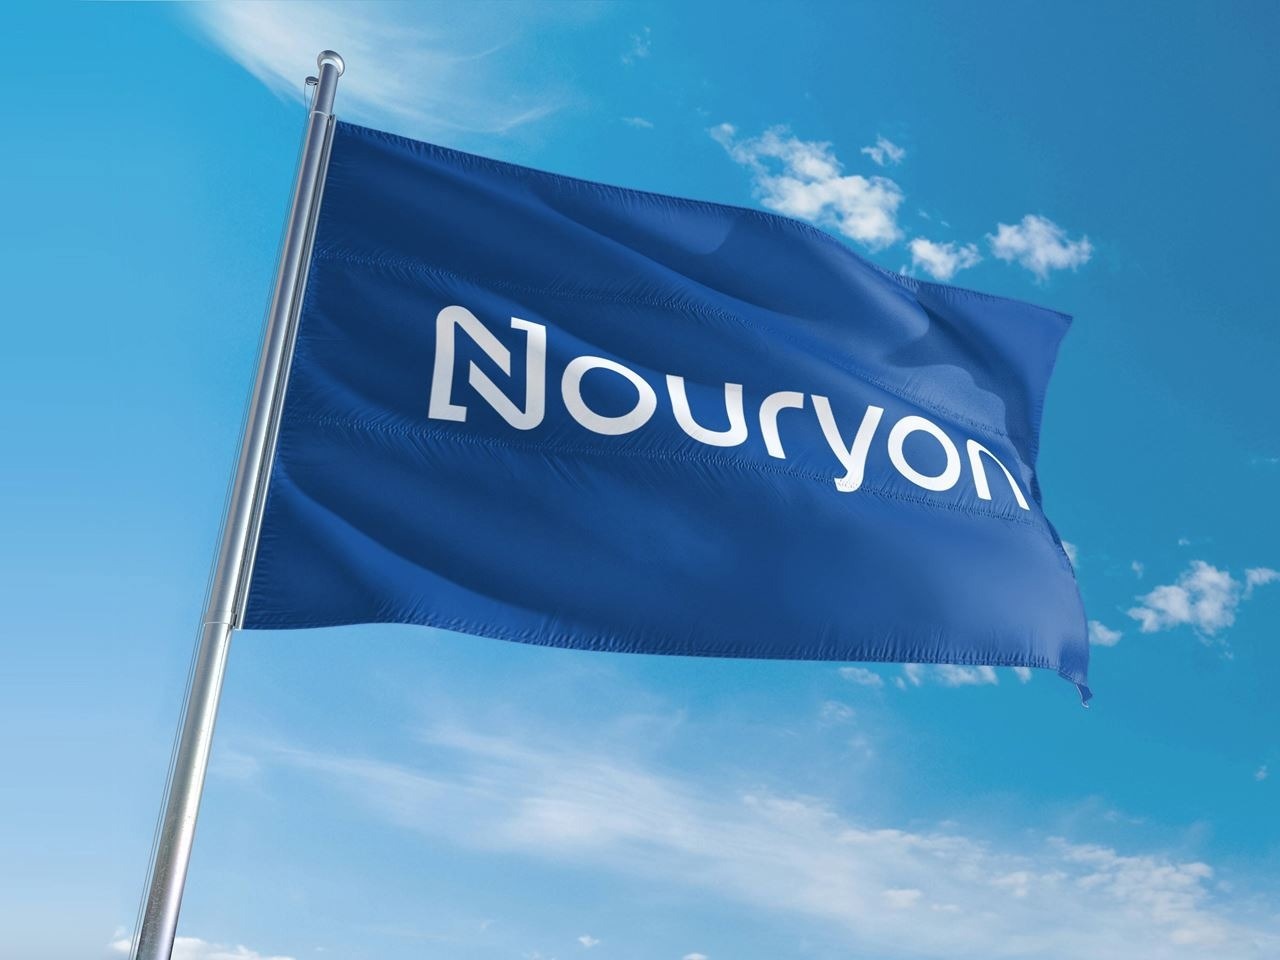 Nouryon Signs its First Power Purchase Agreement for an Onsite Solar Project in the US